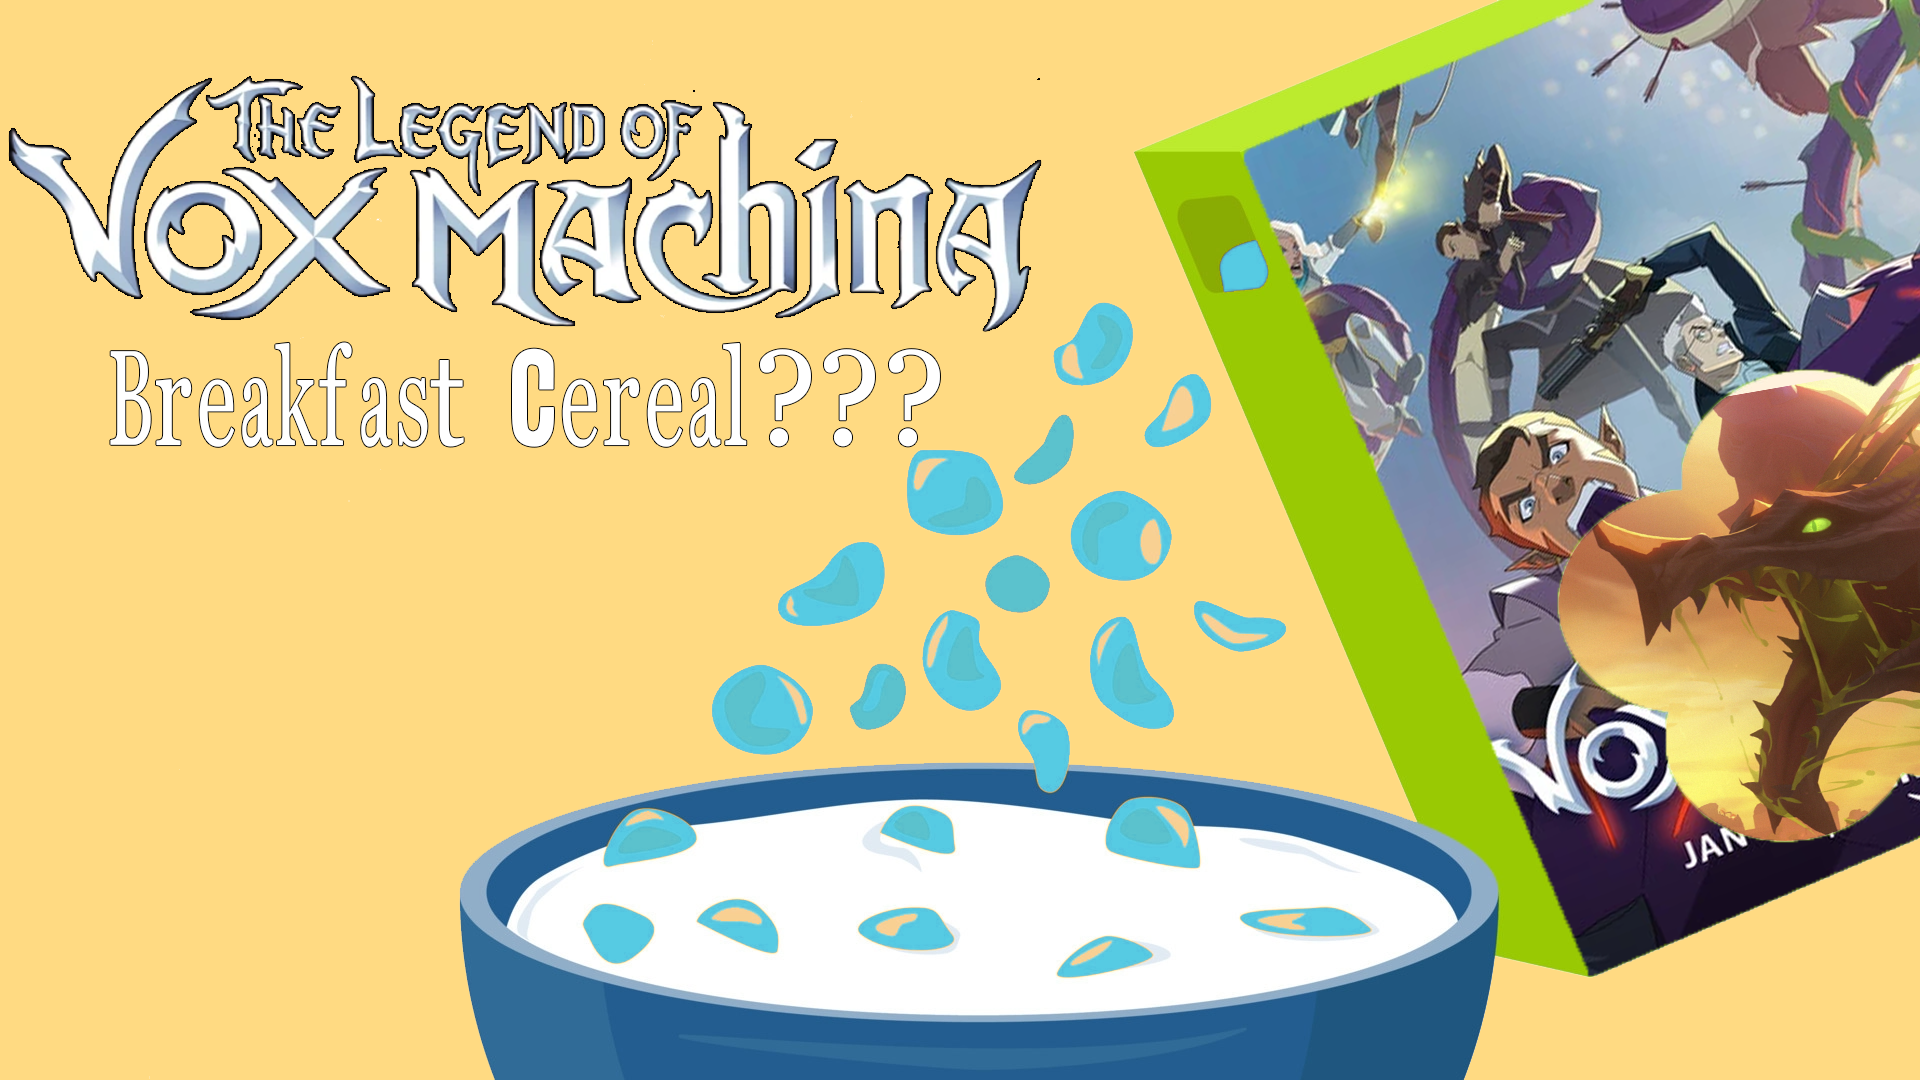 Sweet and Sugary Legend of Vox Machina Cereal is the Next Goal for Critical Role